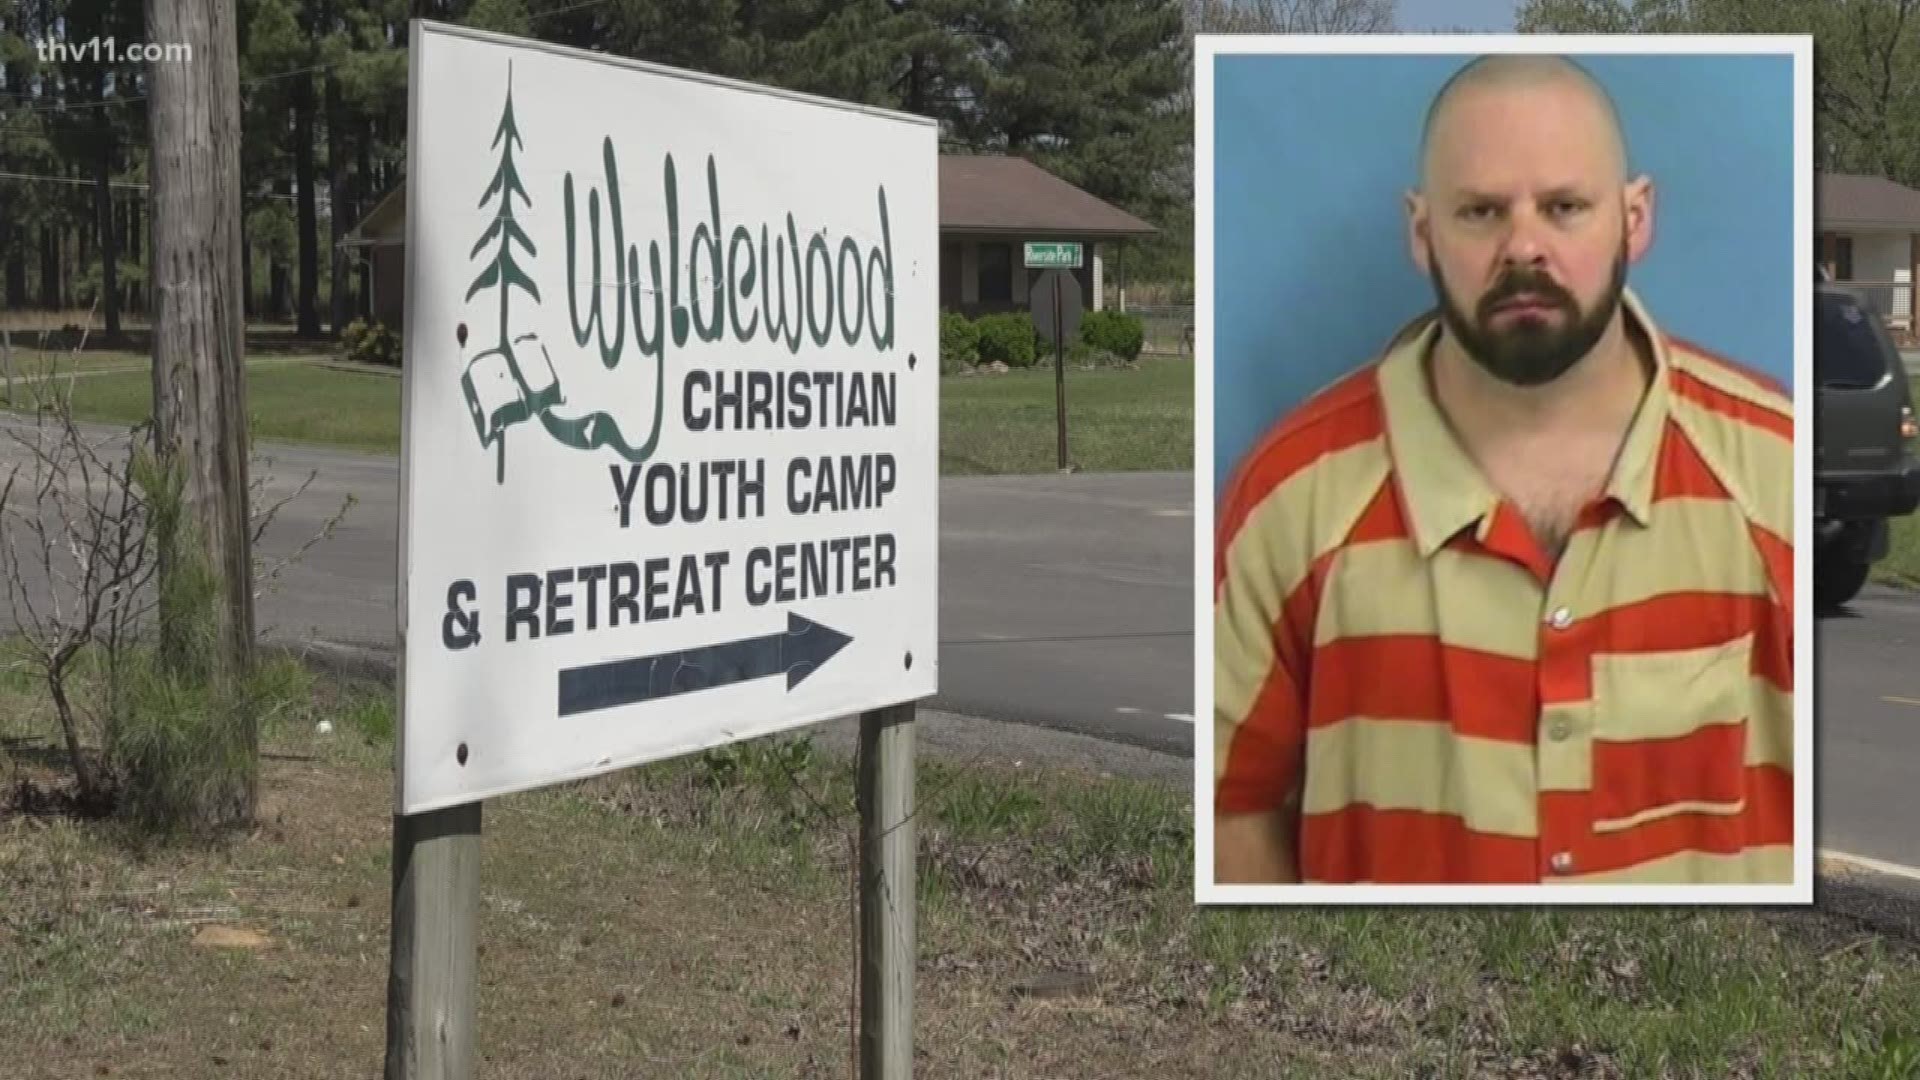 A White County judge says the former director of a christian summer camp secretly videotaped a family, including a child, undressing.